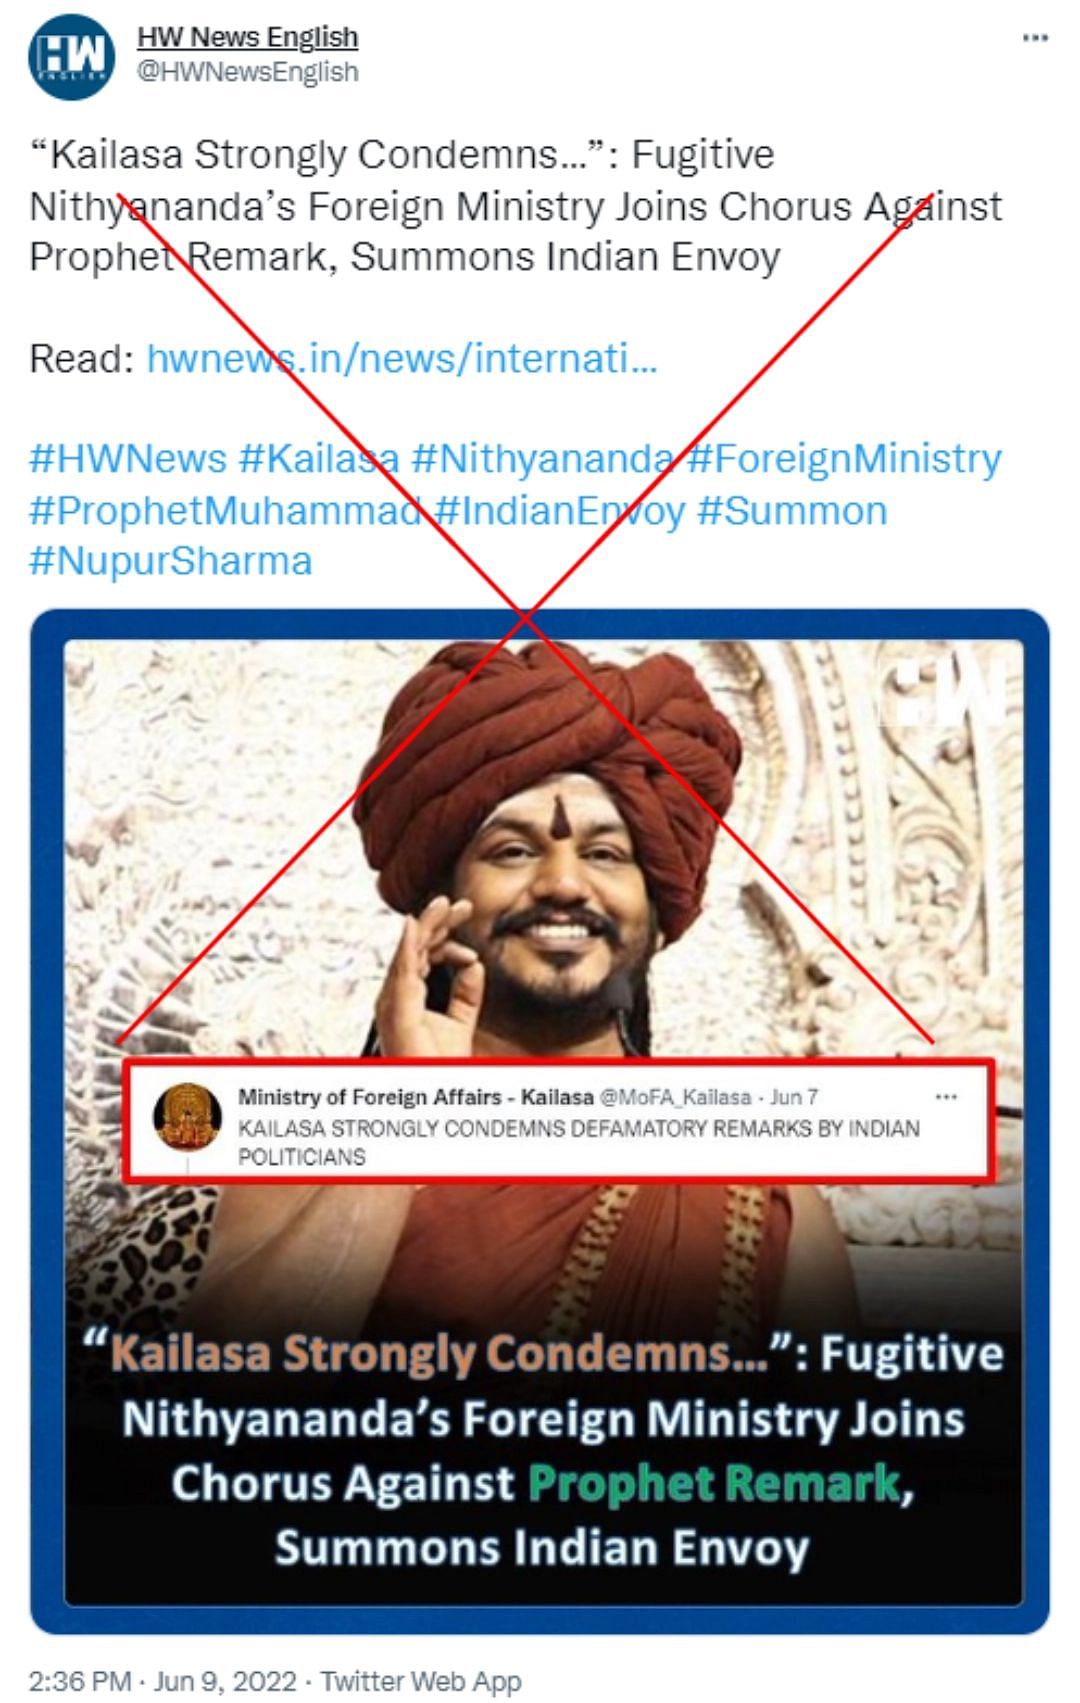 The Twitter account belonging to the Ministry of Foreign Affairs of Kailasa turned out to be fake.